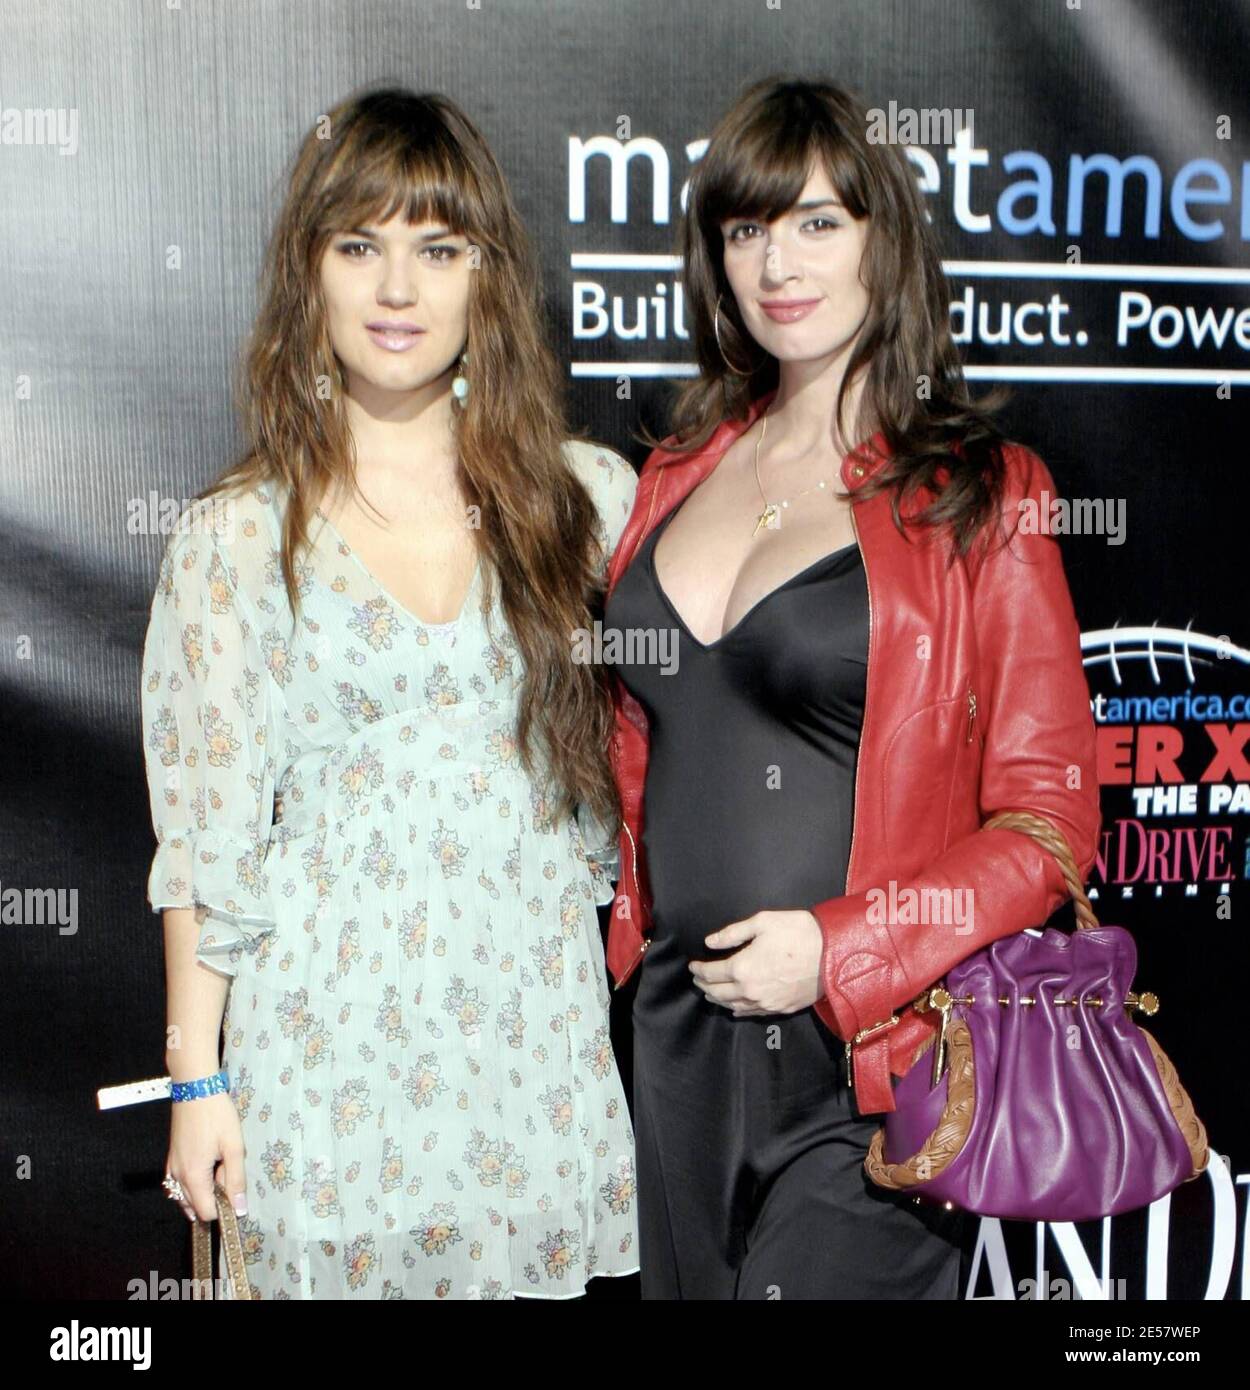 A pregnant Paz Vega and her sister Sara arrive at the Market America.com Super XLI Party in South Beach, Florida. 2/3/07    [[ral]] Stock Photo